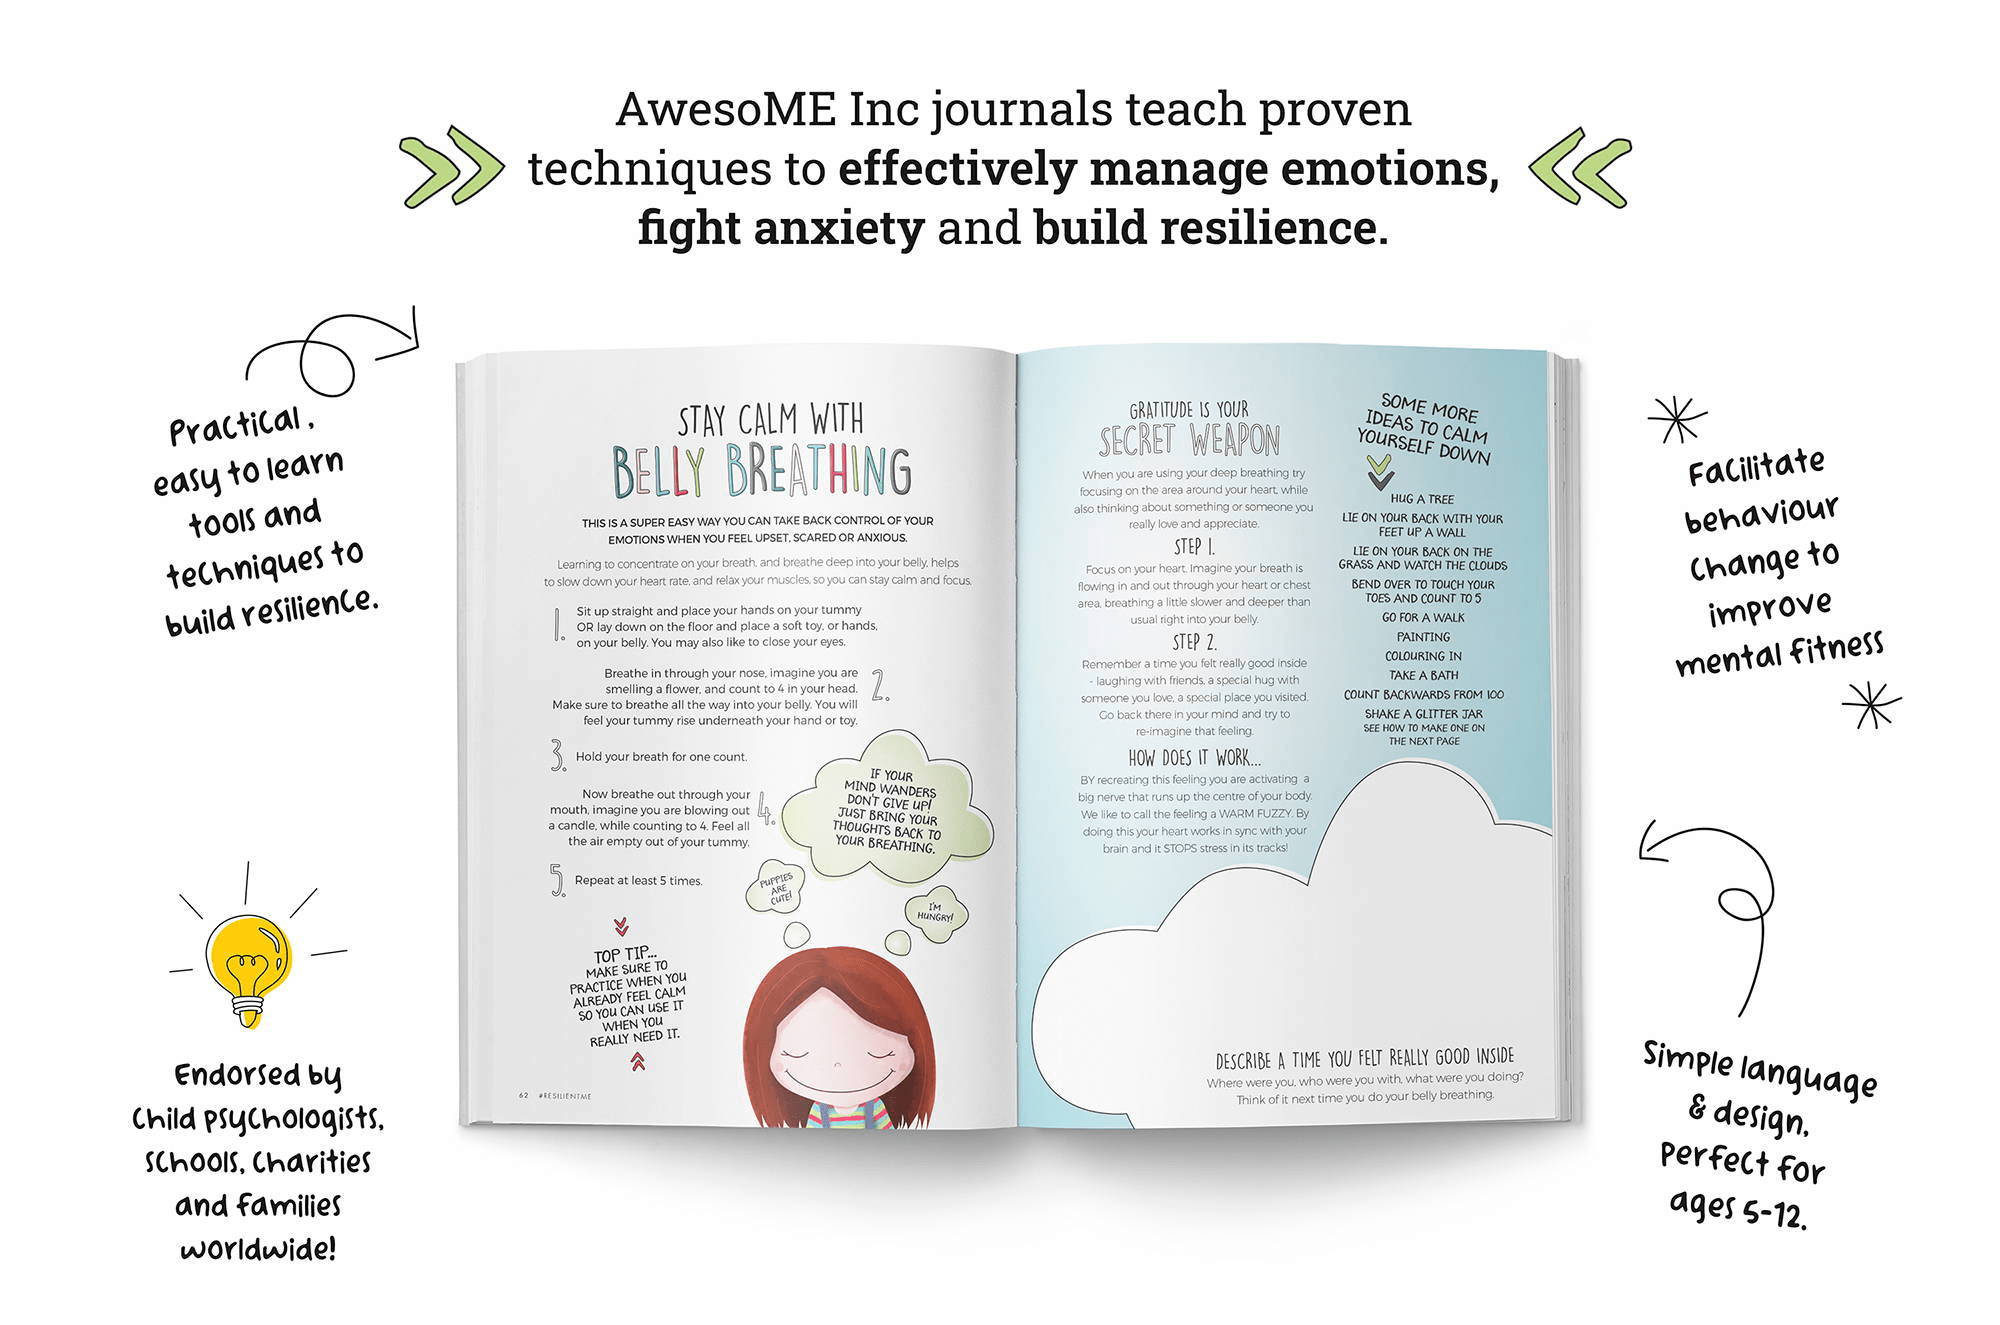 Awesome Inc Journals teach proven techniques to effectively manage emotions, fight anxiety and build resilience